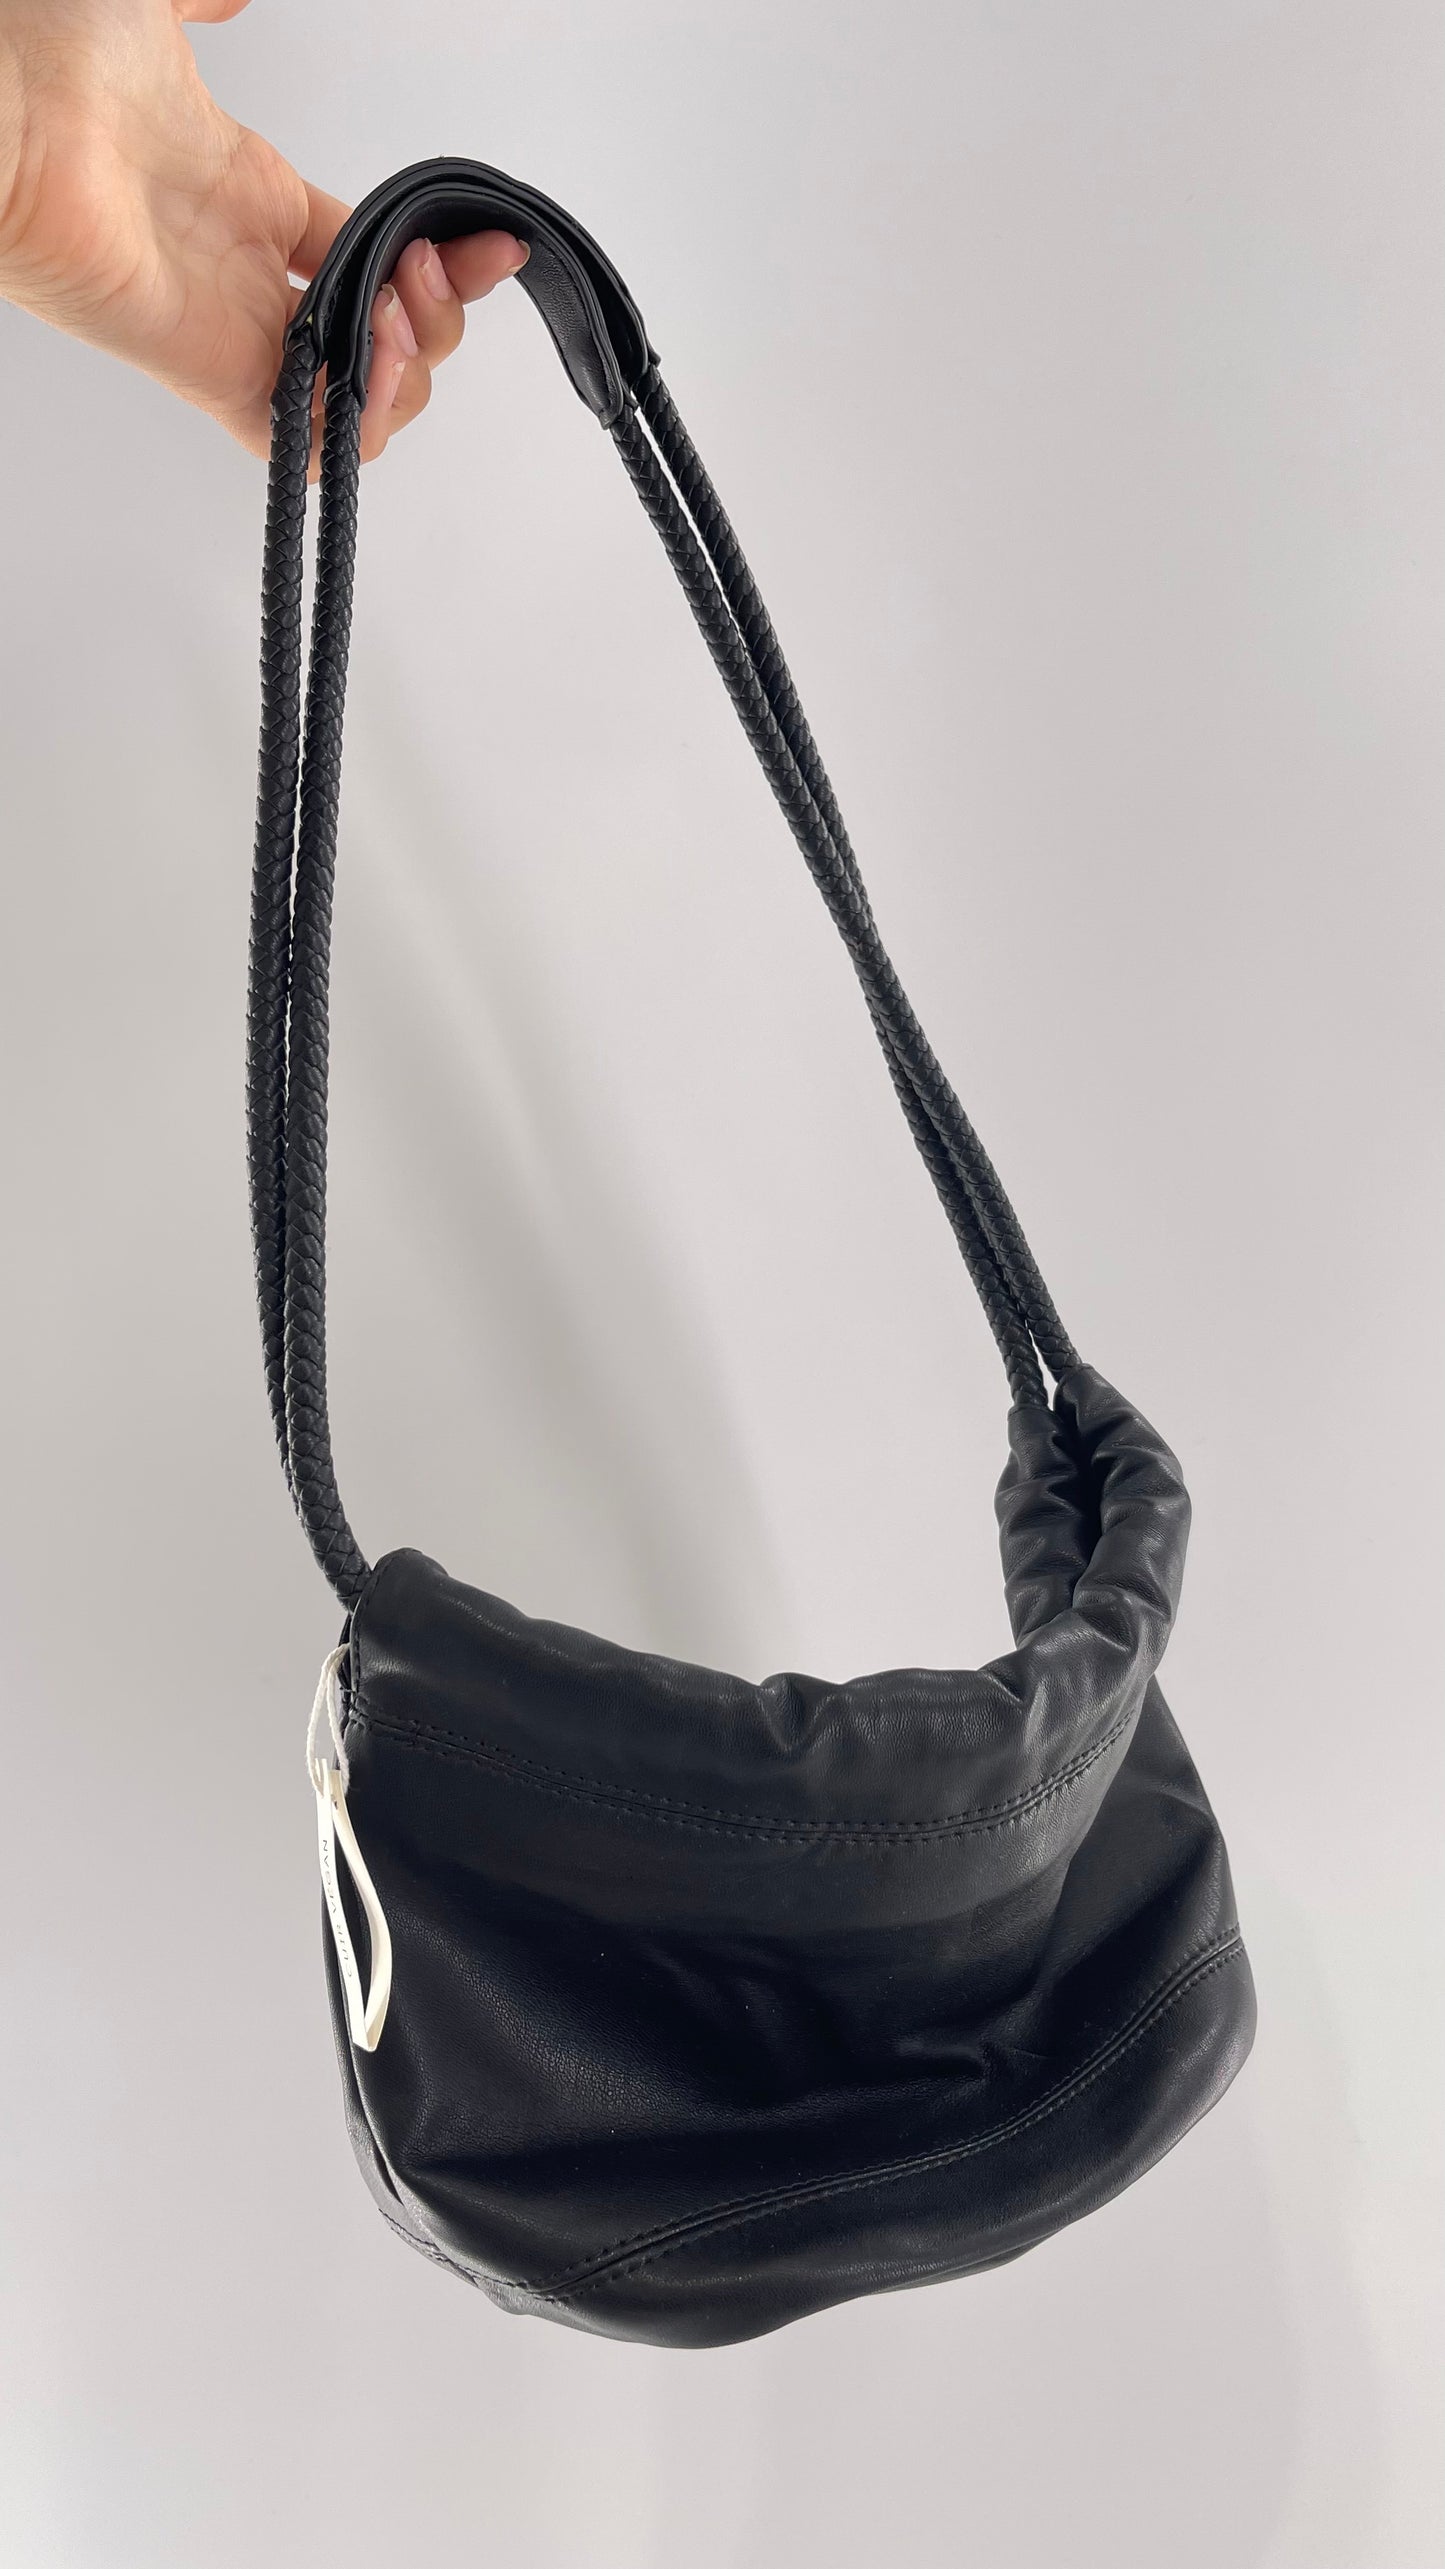 Urban Outfitters Black Adjustable Bucket Tank Vegan Leather Bag with Braided Handles